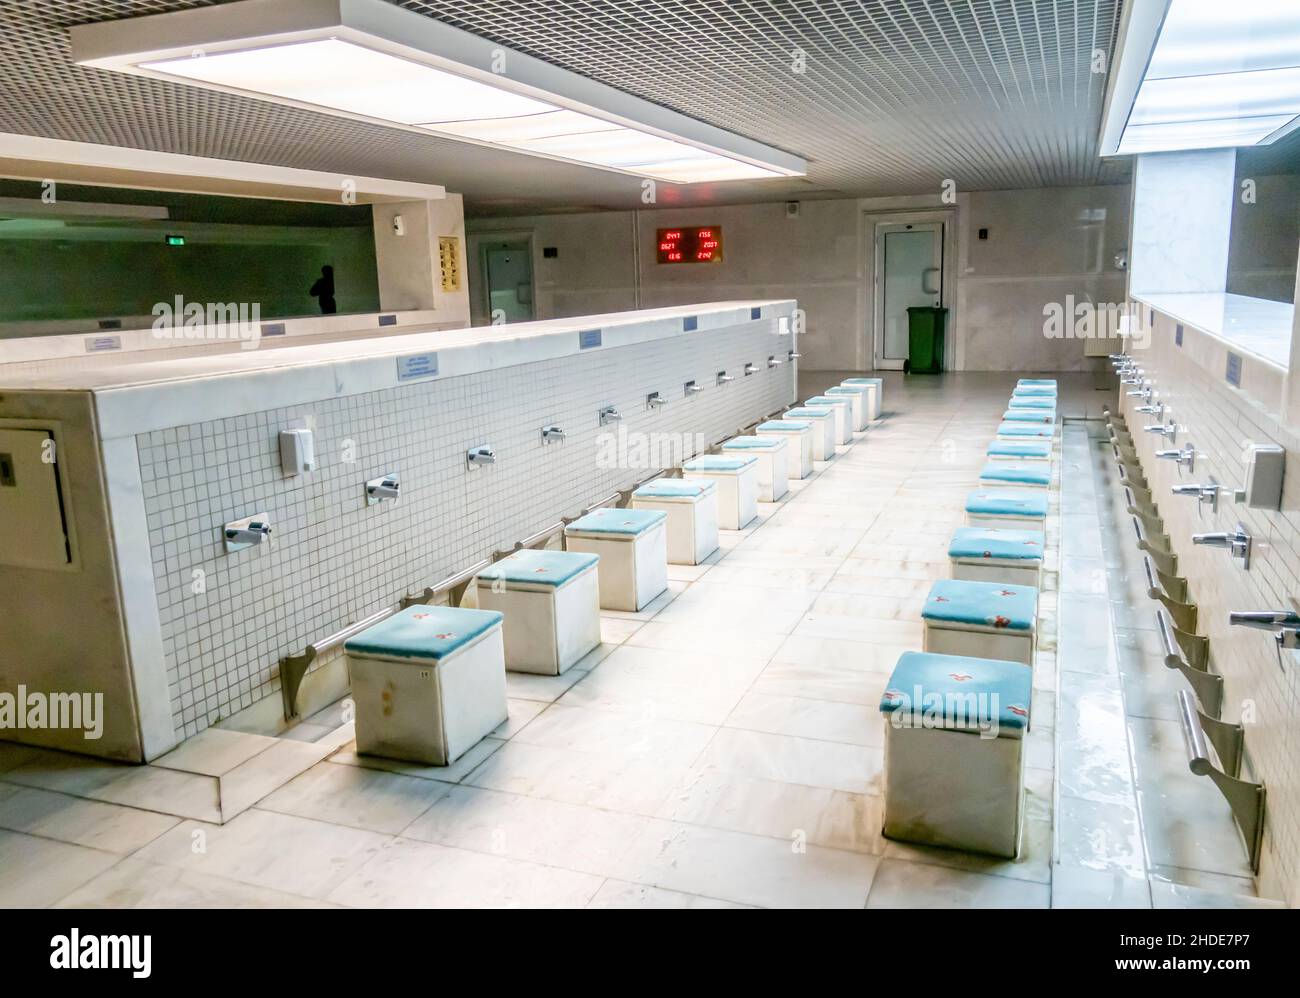 Tiled bathroom for washing feet in Khazret- Sultan Mosque, Nur-Sultan, Kazakhstan, Central Asia. Stock Photo